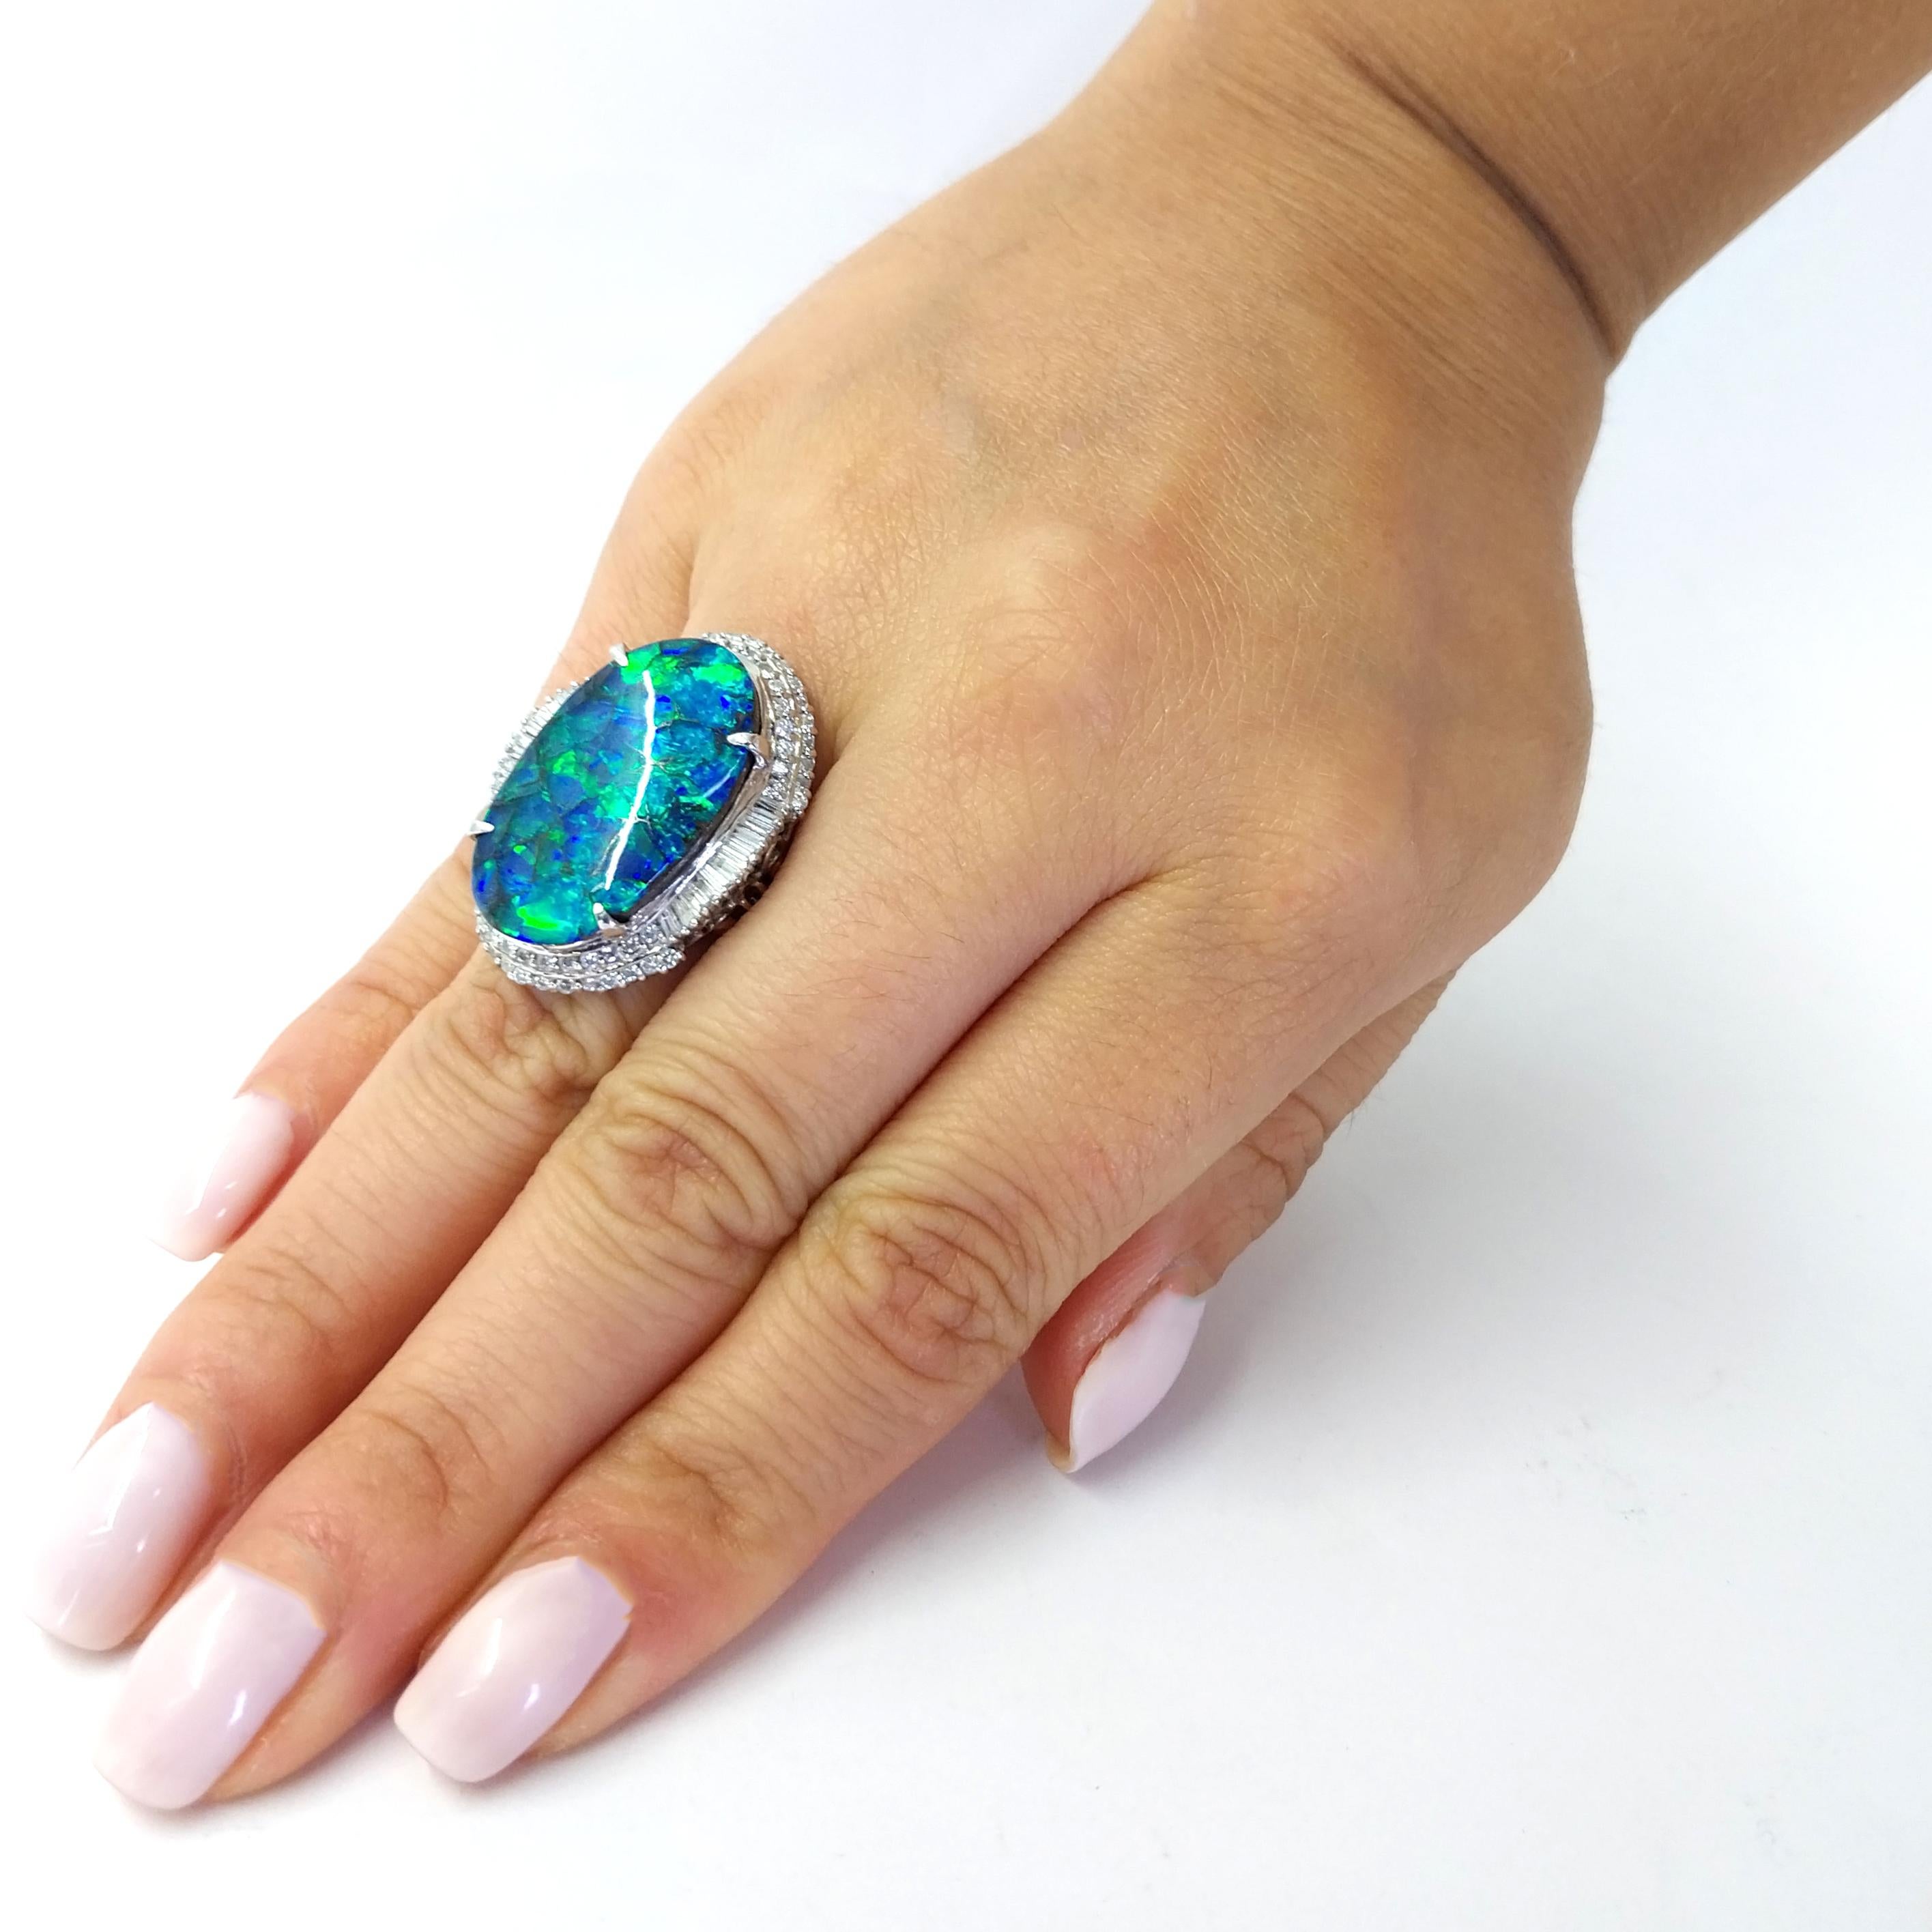 Platinum Ballerina Ring Featuring A 14.22 Carat Oval Boulder Opal with Stunning Blue and Green Pattern. Accented by 0.90 Carat Total Weight Round and Baguette Cut Diamonds of SI Clarity and H Color. Finger Size 4.75. Purchase Includes One Sizing